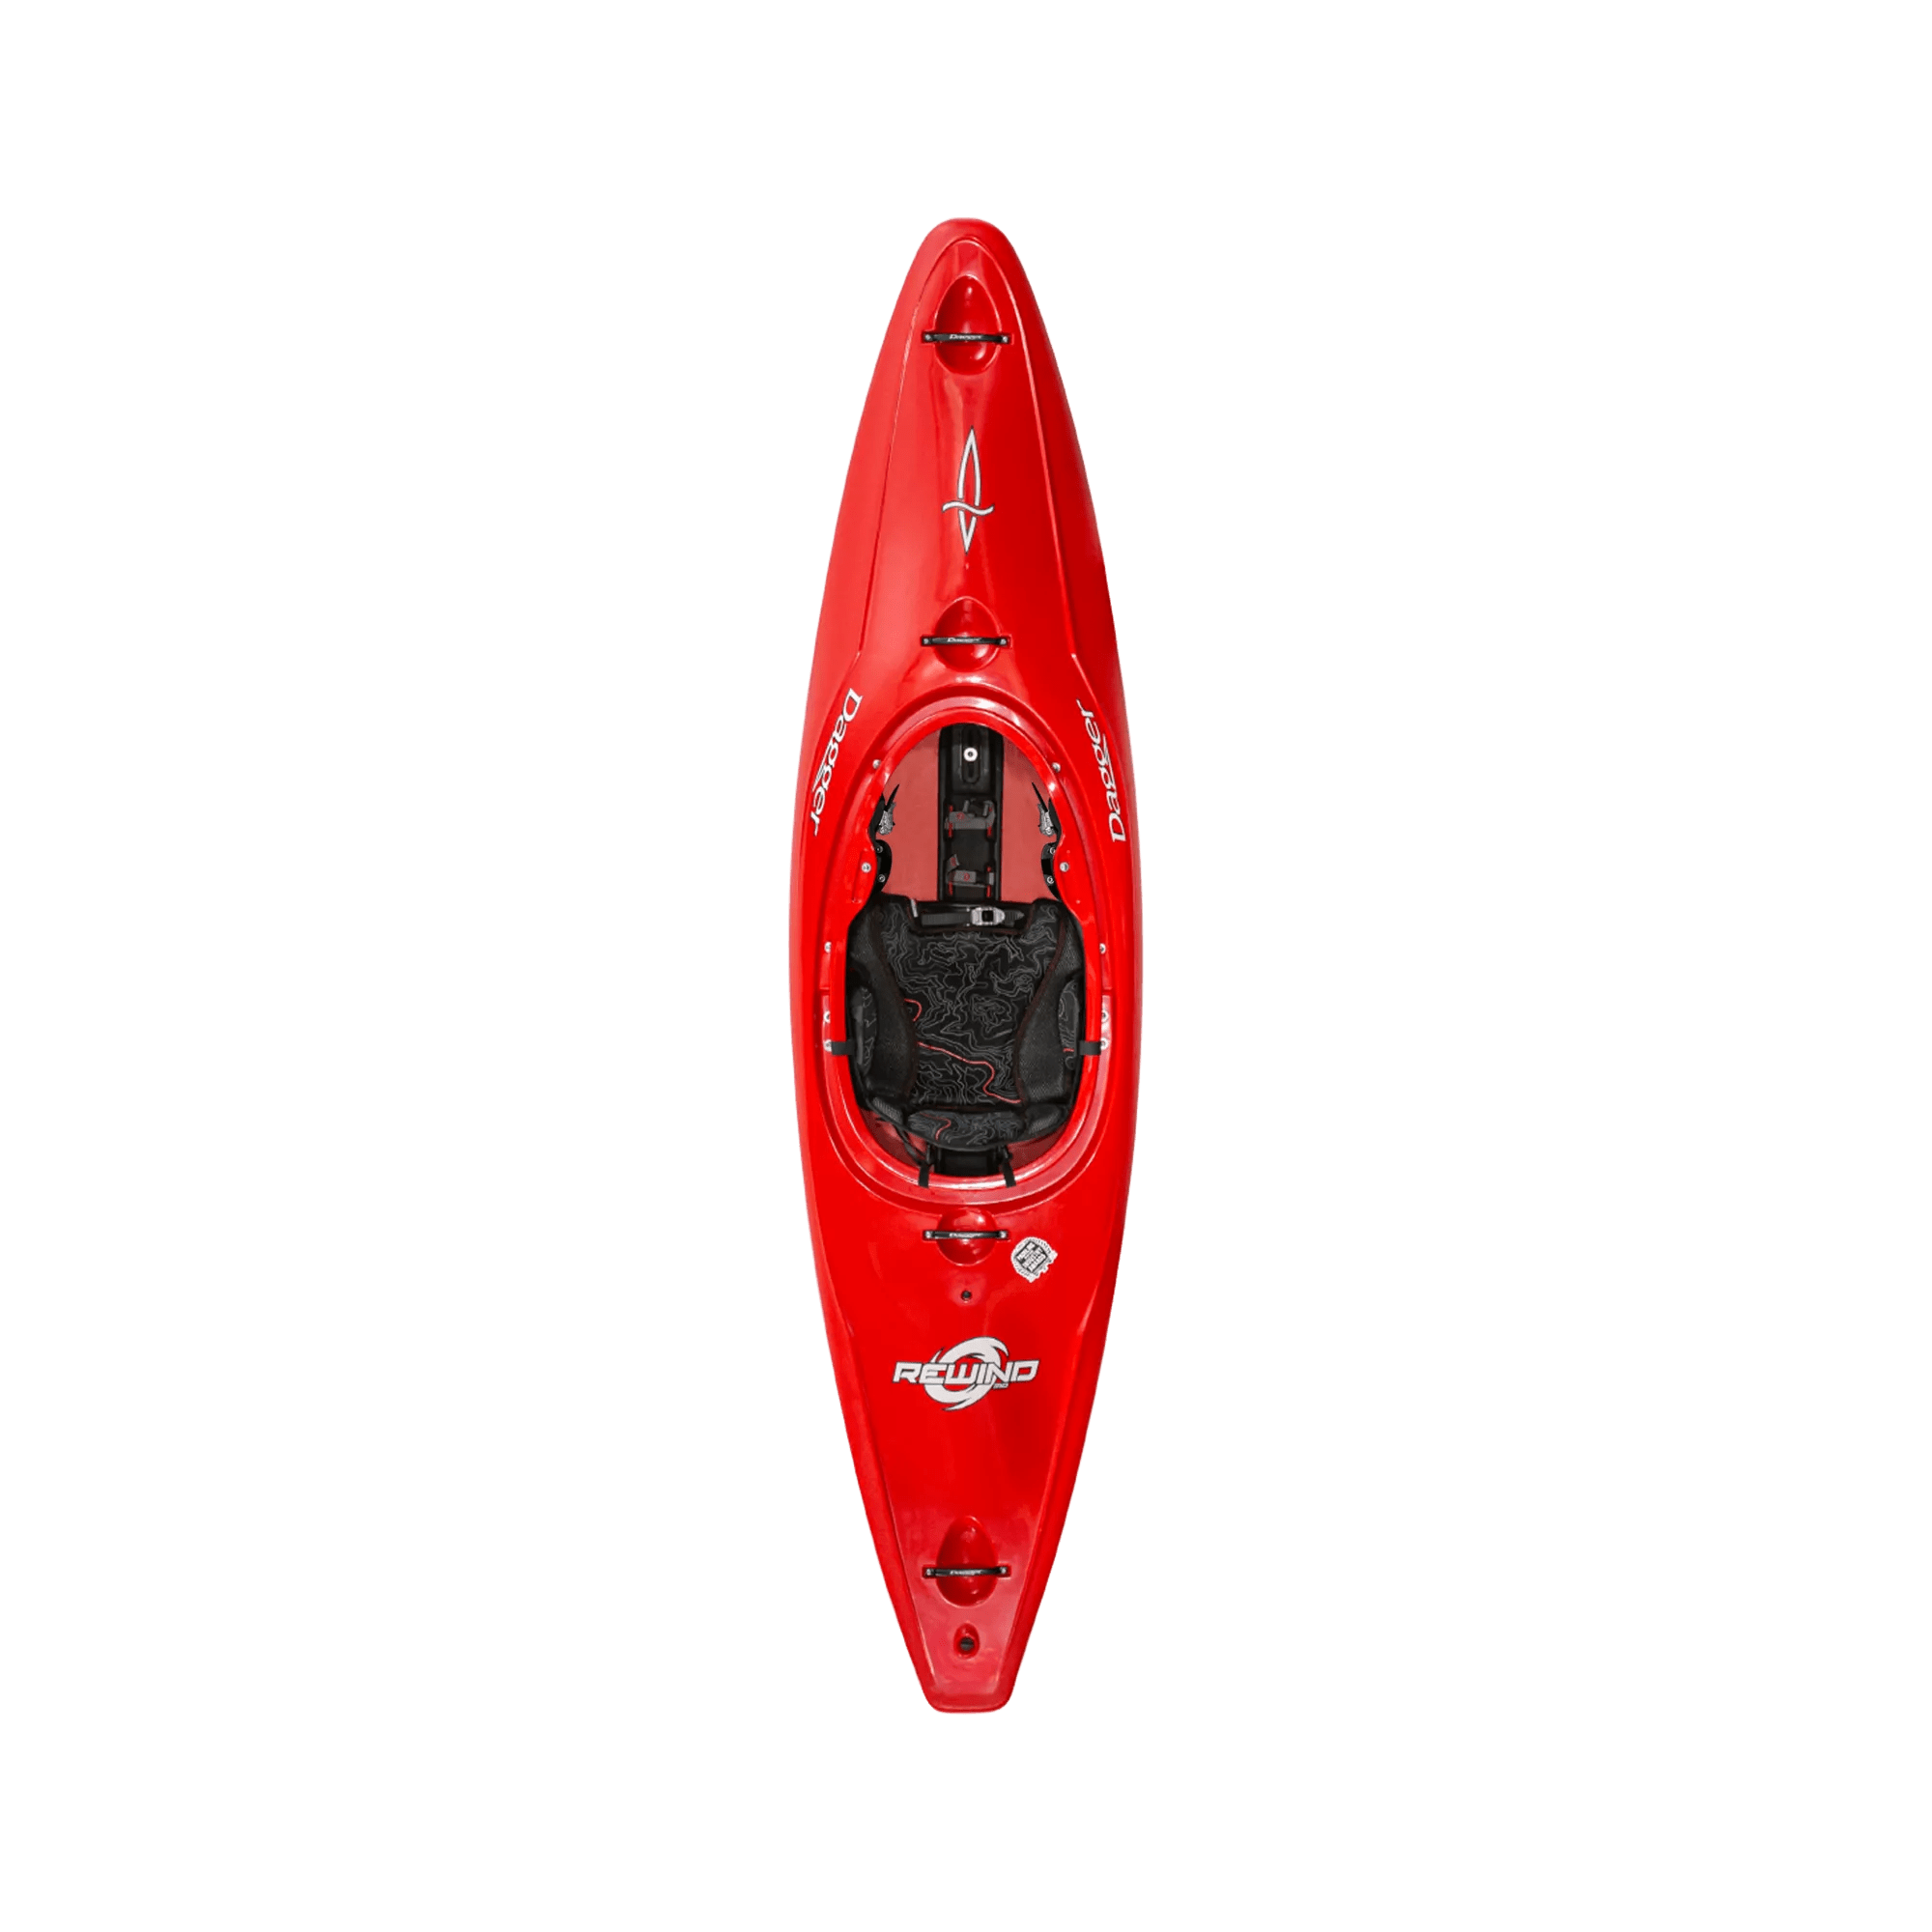 DAGGER - Rewind SM River Play Whitewater Kayak - Red - 9010474057 - TOP